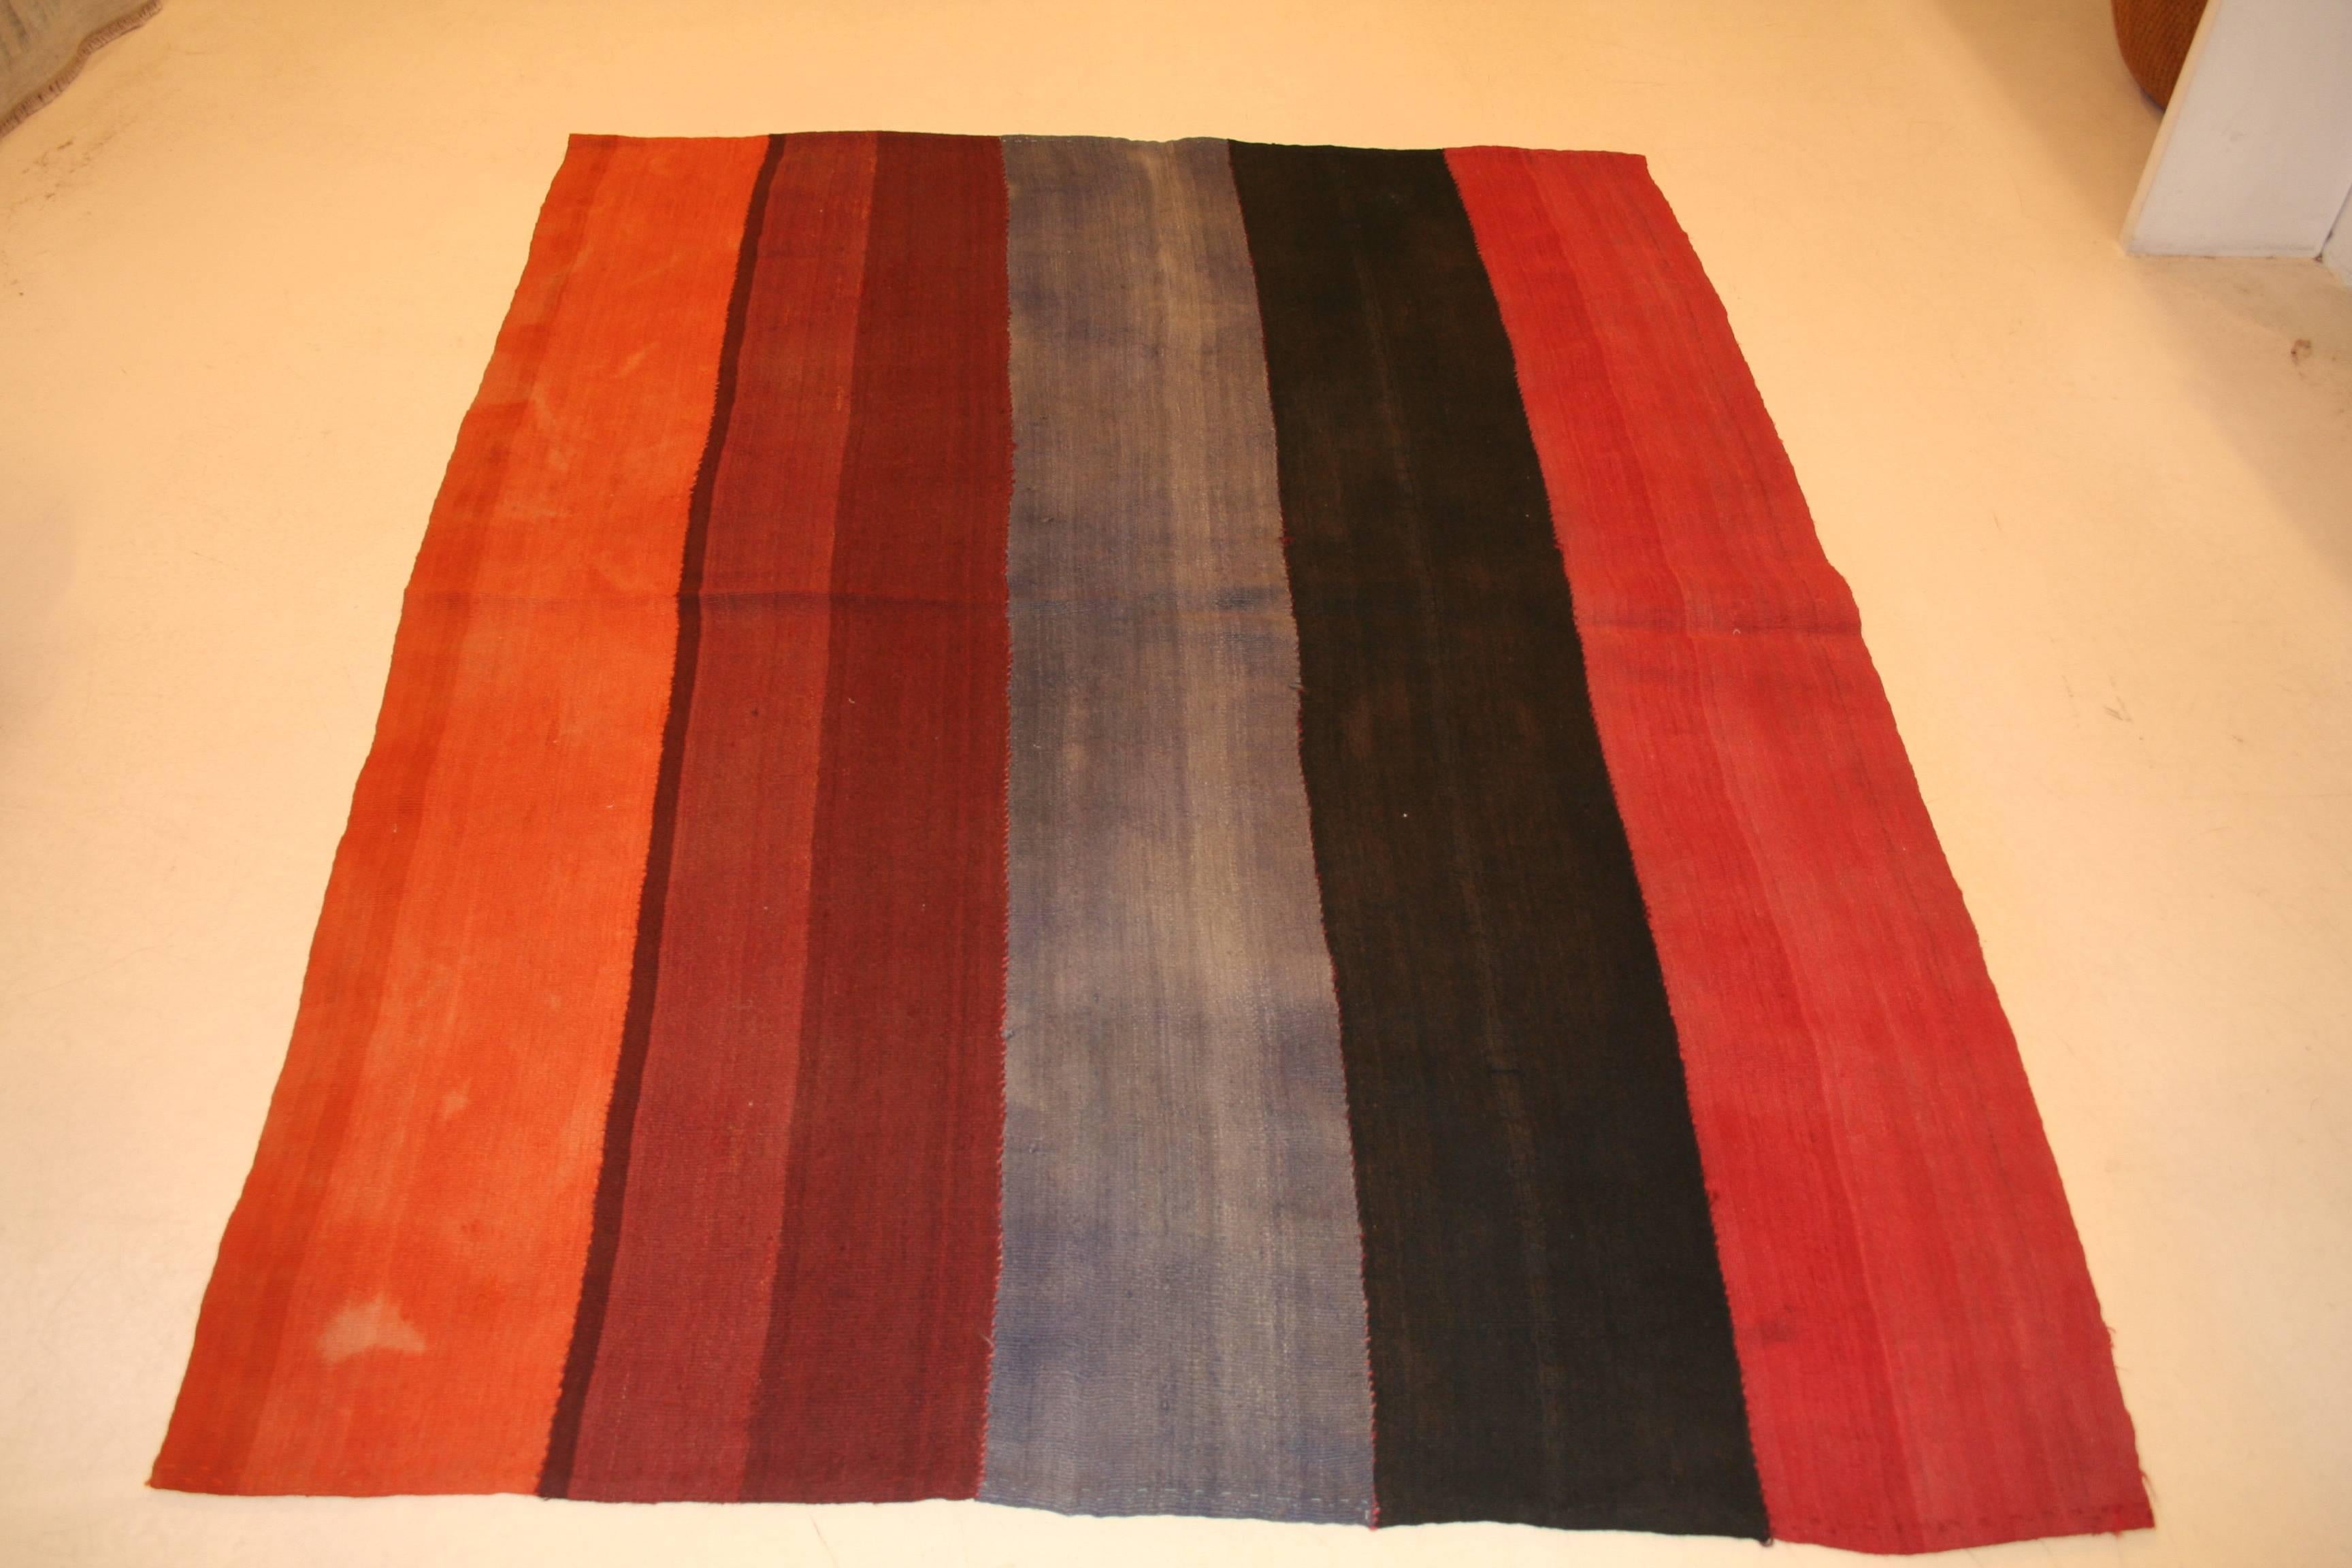 Woven in five vibrant colors, this Turkish wool flat-weave was used by Kurdish nomadic tribes located around the area of Sivas as a tent divider, hanging from the ceiling of the tent creating a partition. Called 'perdeh', which means curtain in